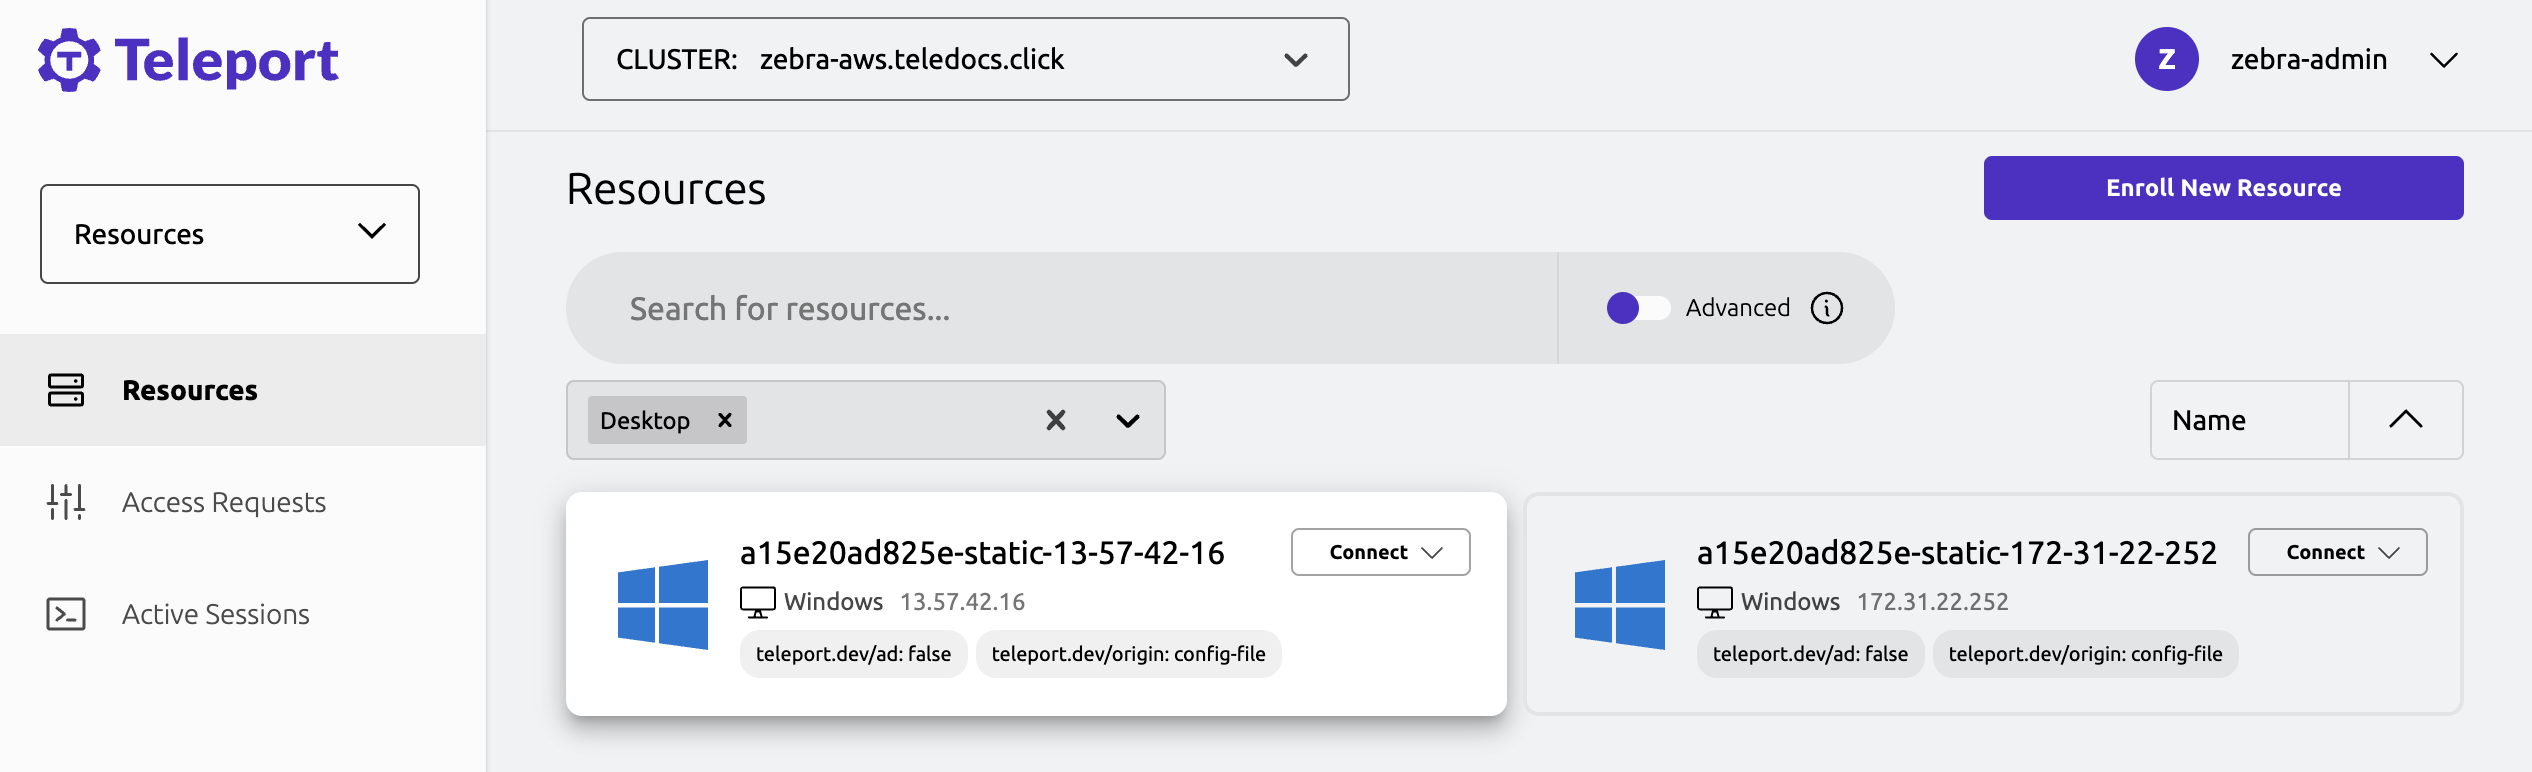 Connect to a Windows desktop from the Teleport Web UI